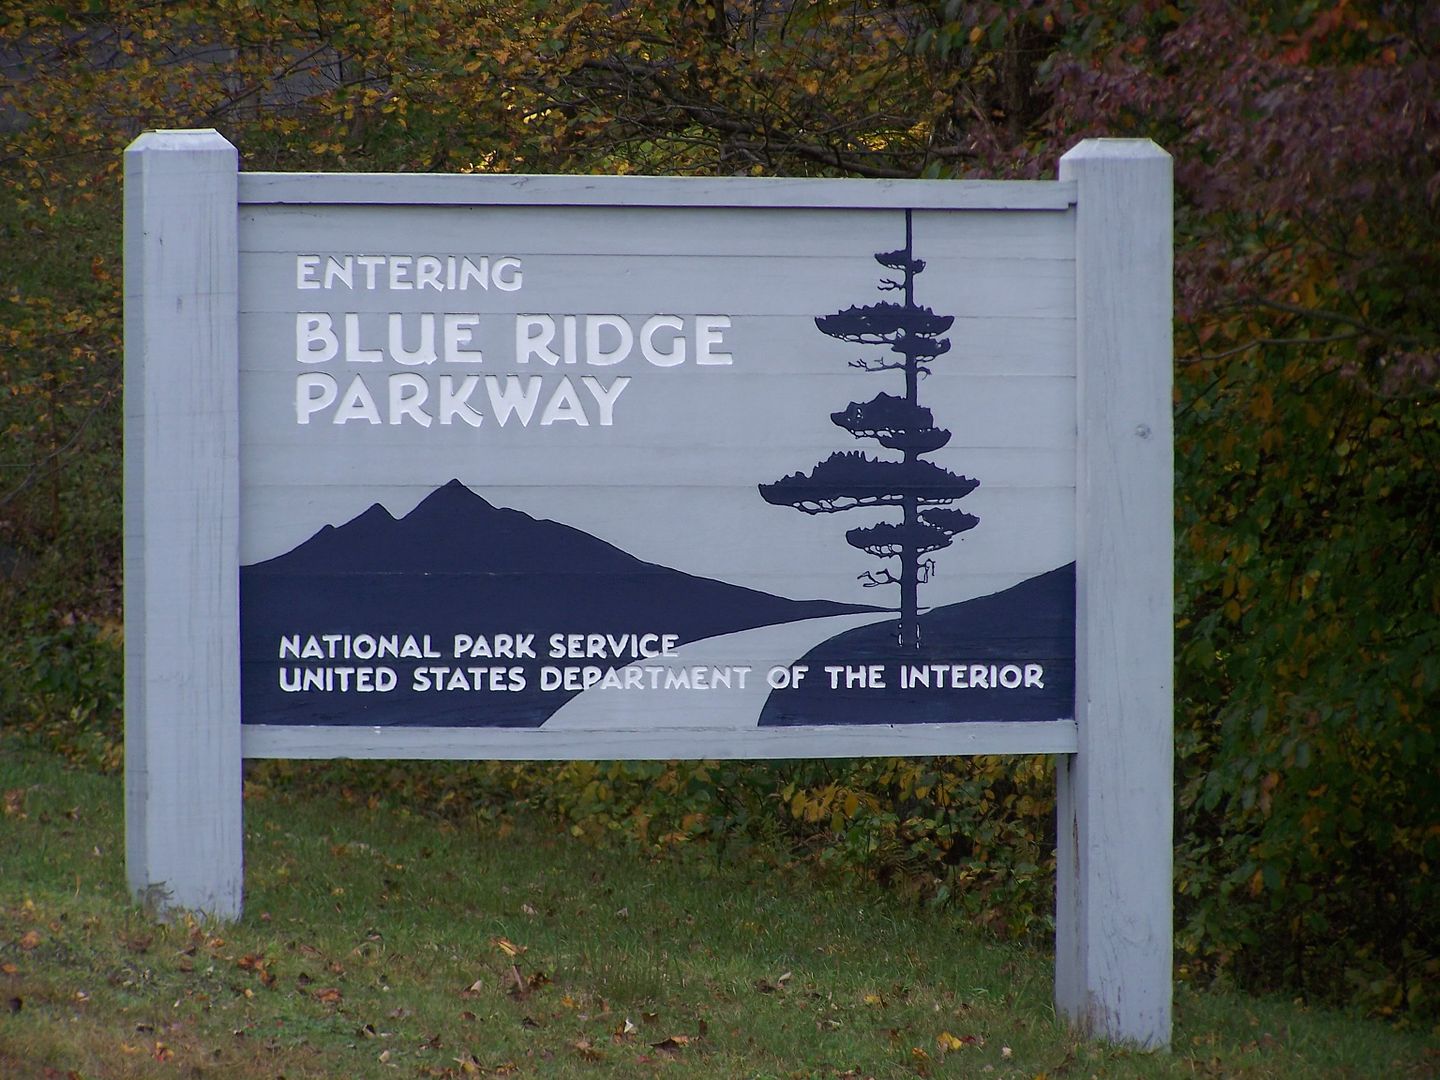 Entrance to the Blue Ridge Parkway on the Haywood-Jackson County Line 
Photo taken by Bobby Coggins in 2009